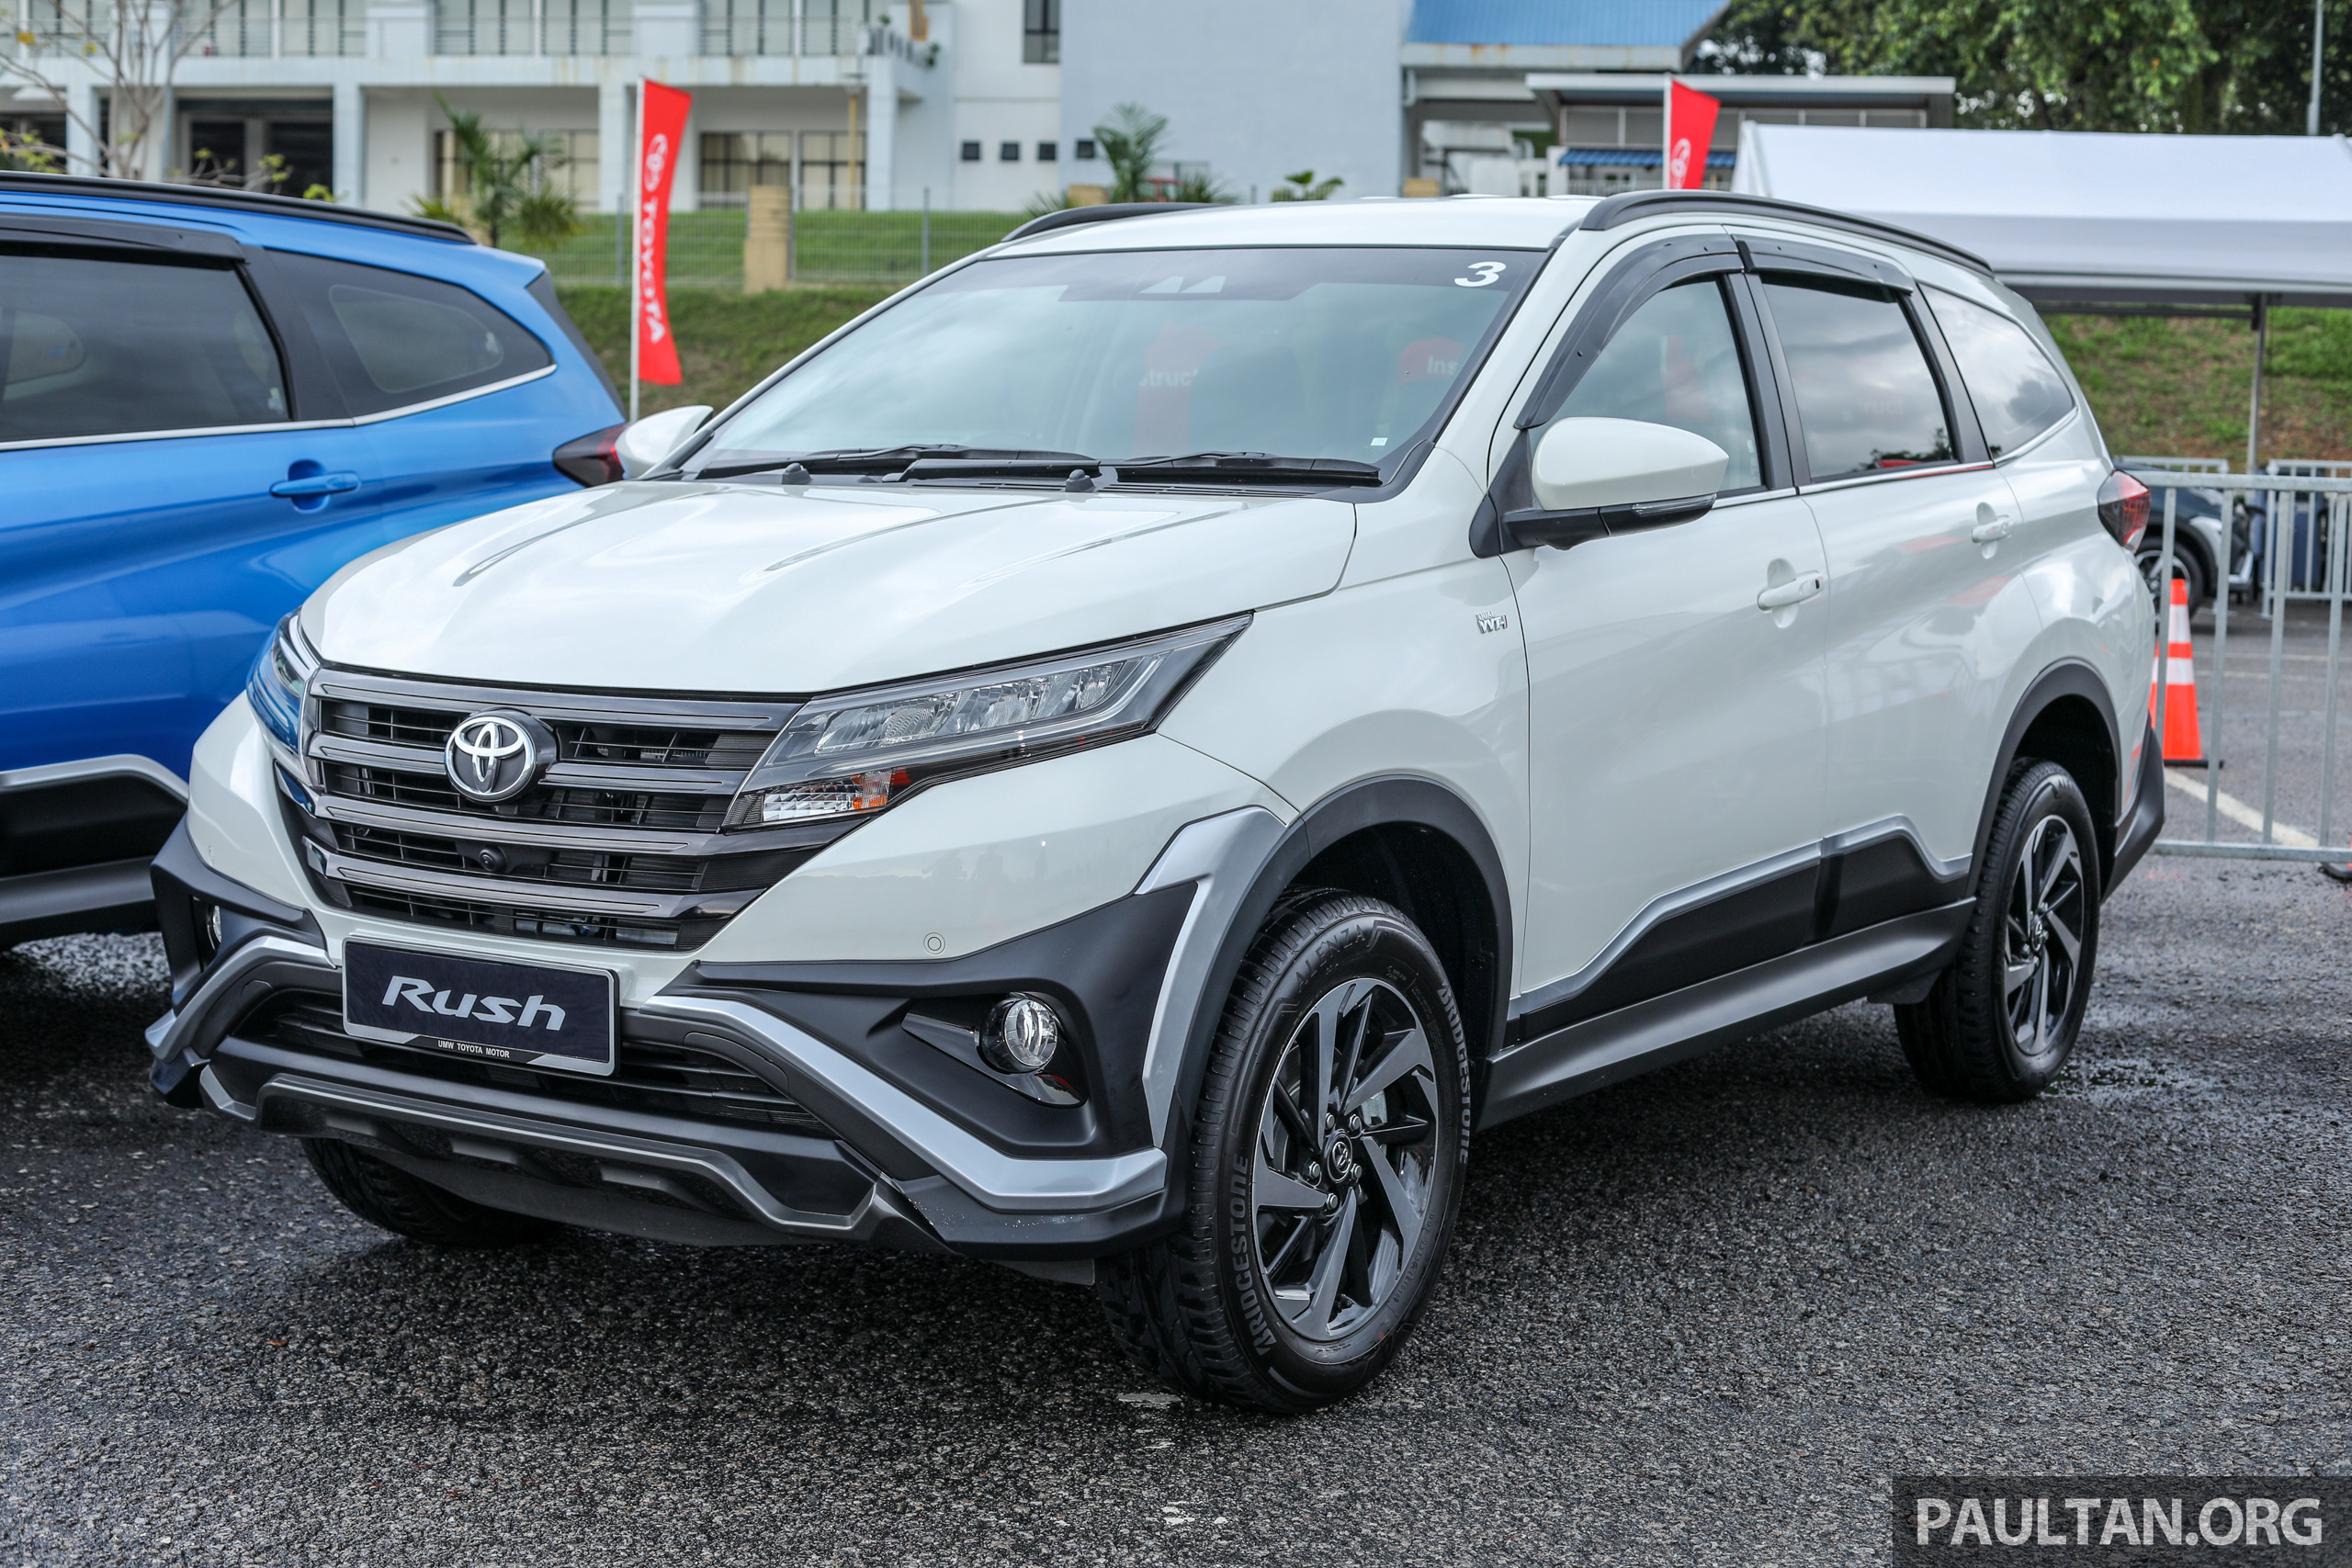 2018 Toyota Rush launched in Malaysia – new 1.5L engine, Pre-Collision ...